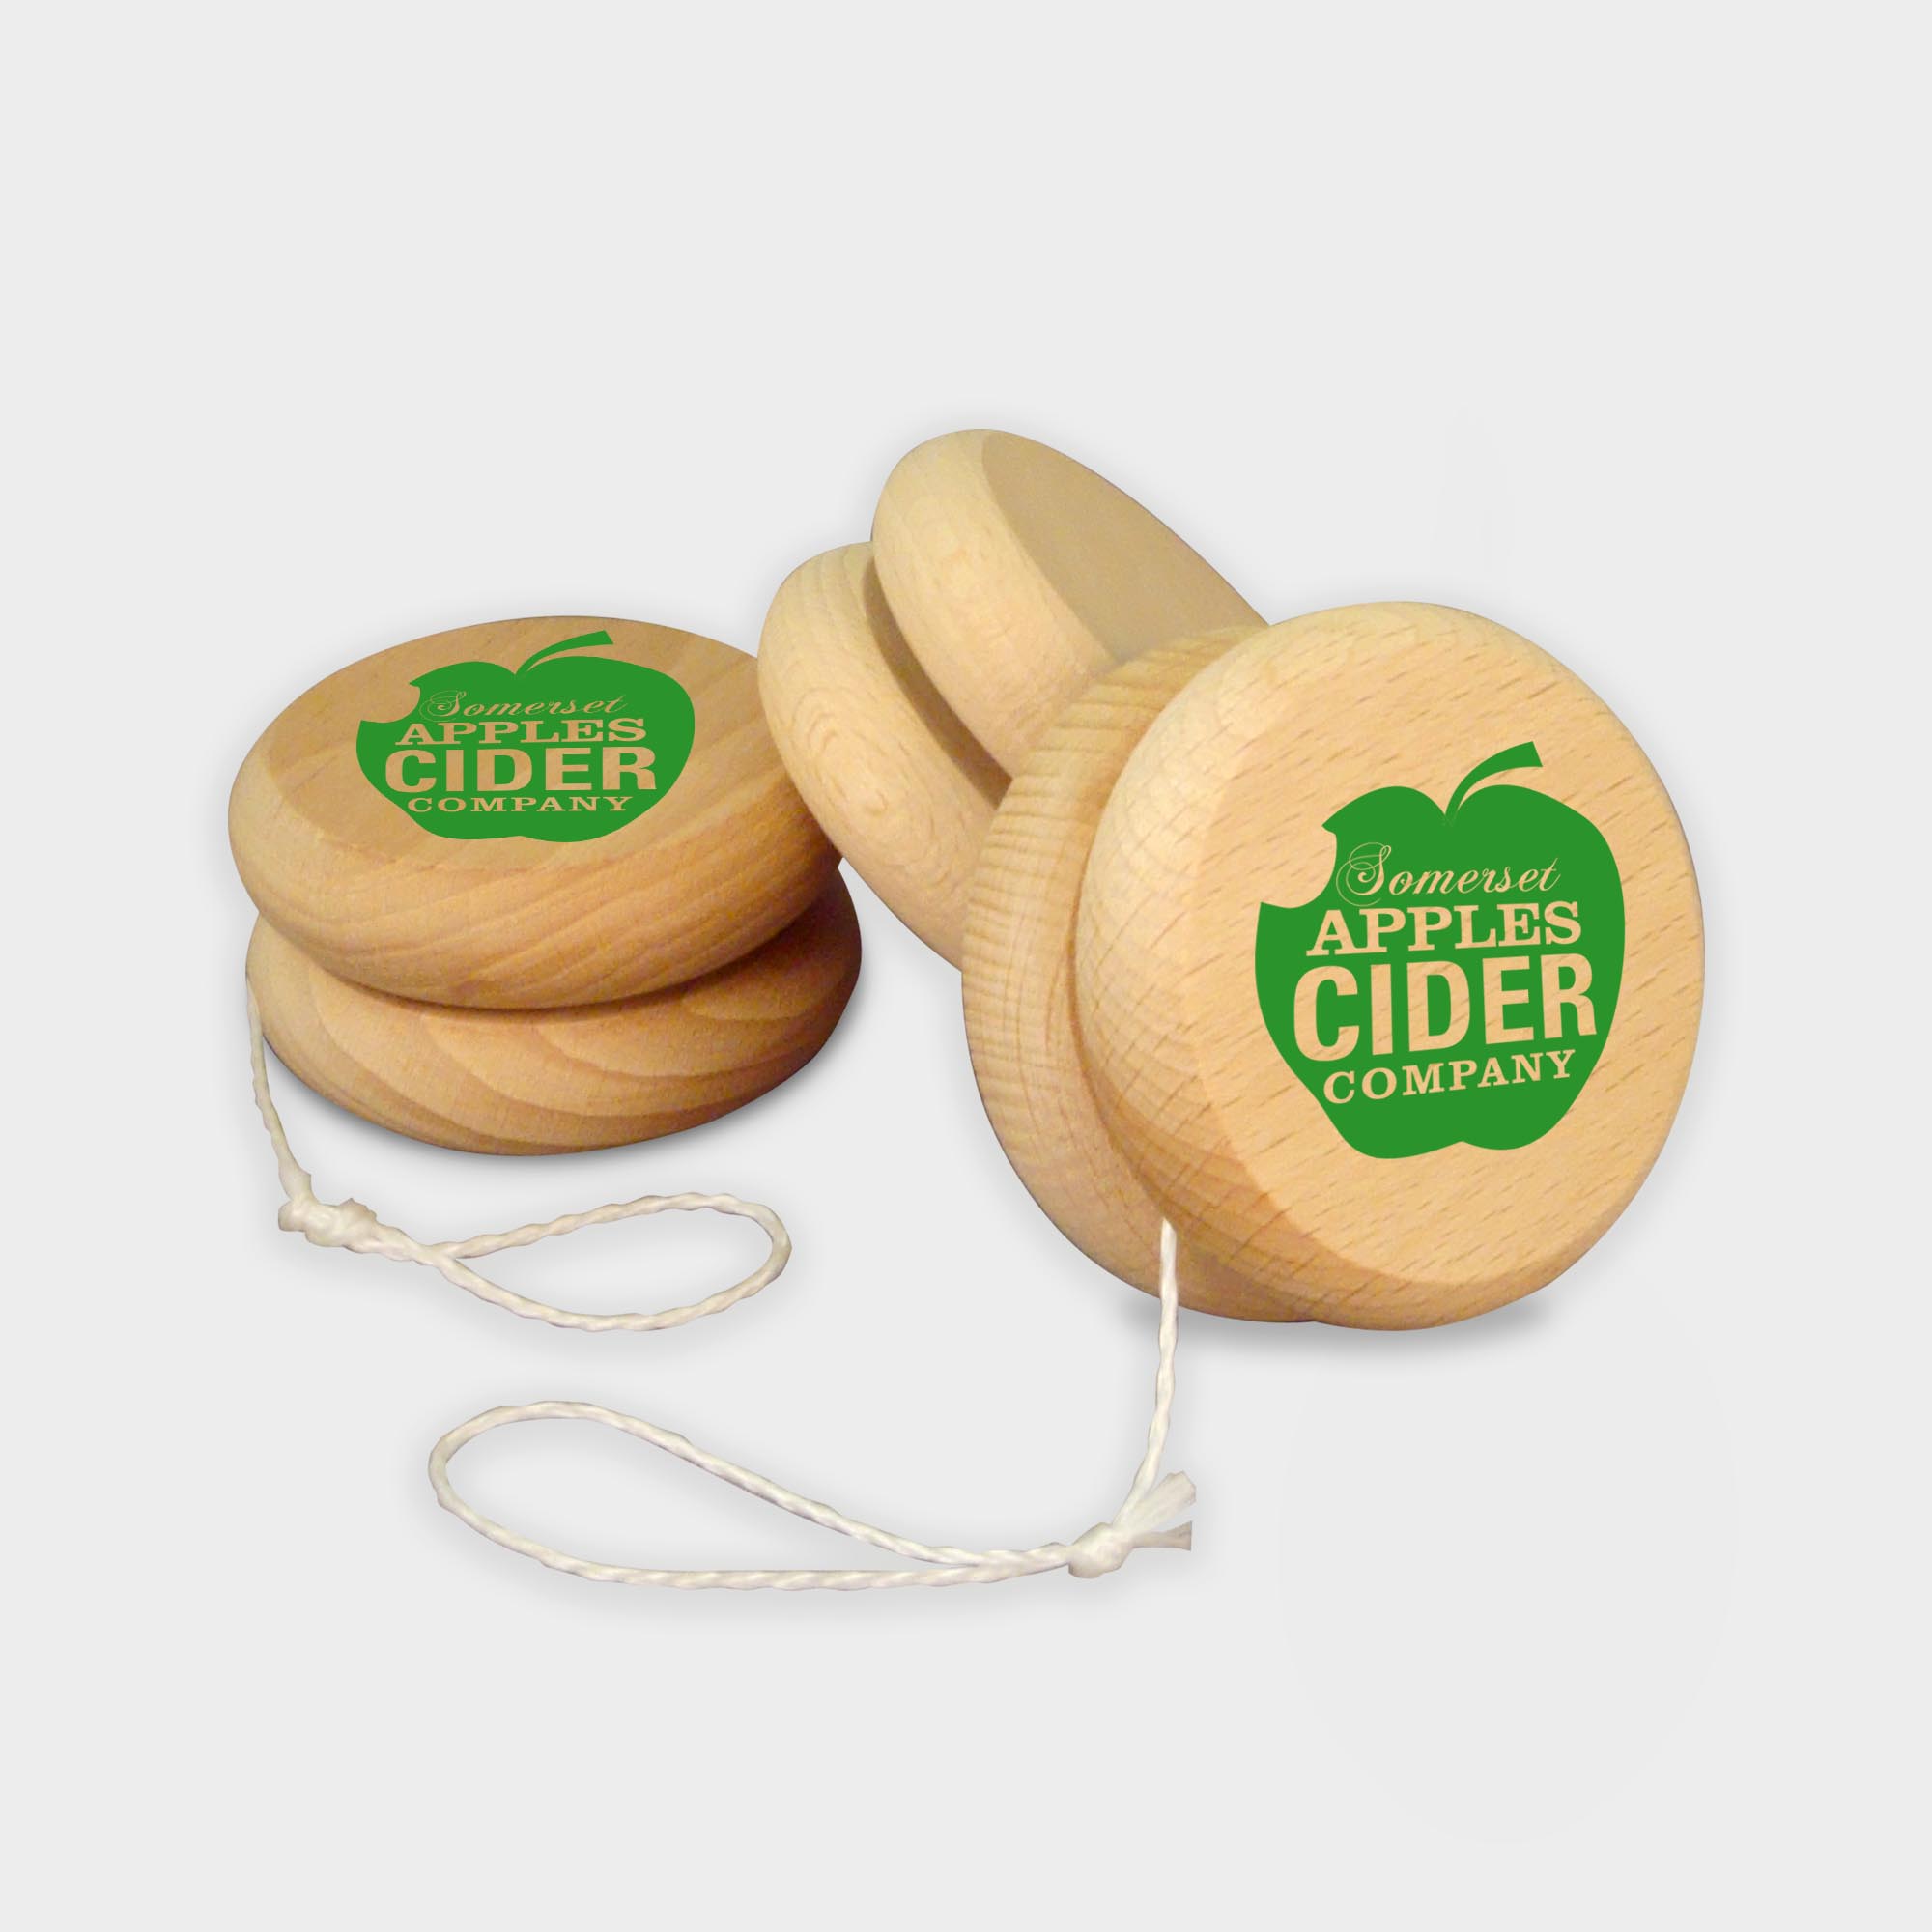 The Green & Good Sustainable Wooden Yoyo